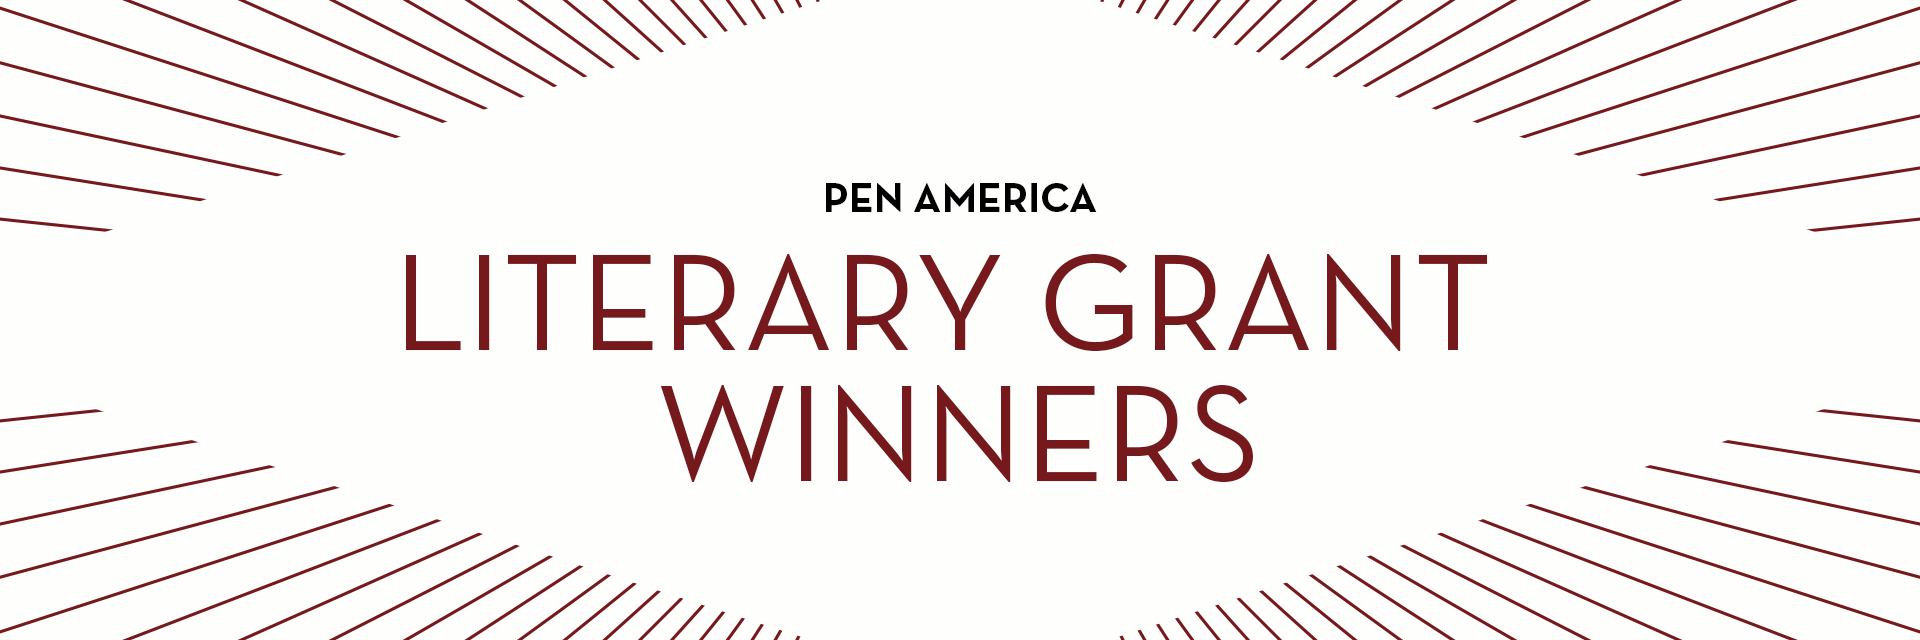 “PEN America Literary Grant Winners” in centered text; maroon rays sticking out from each corner